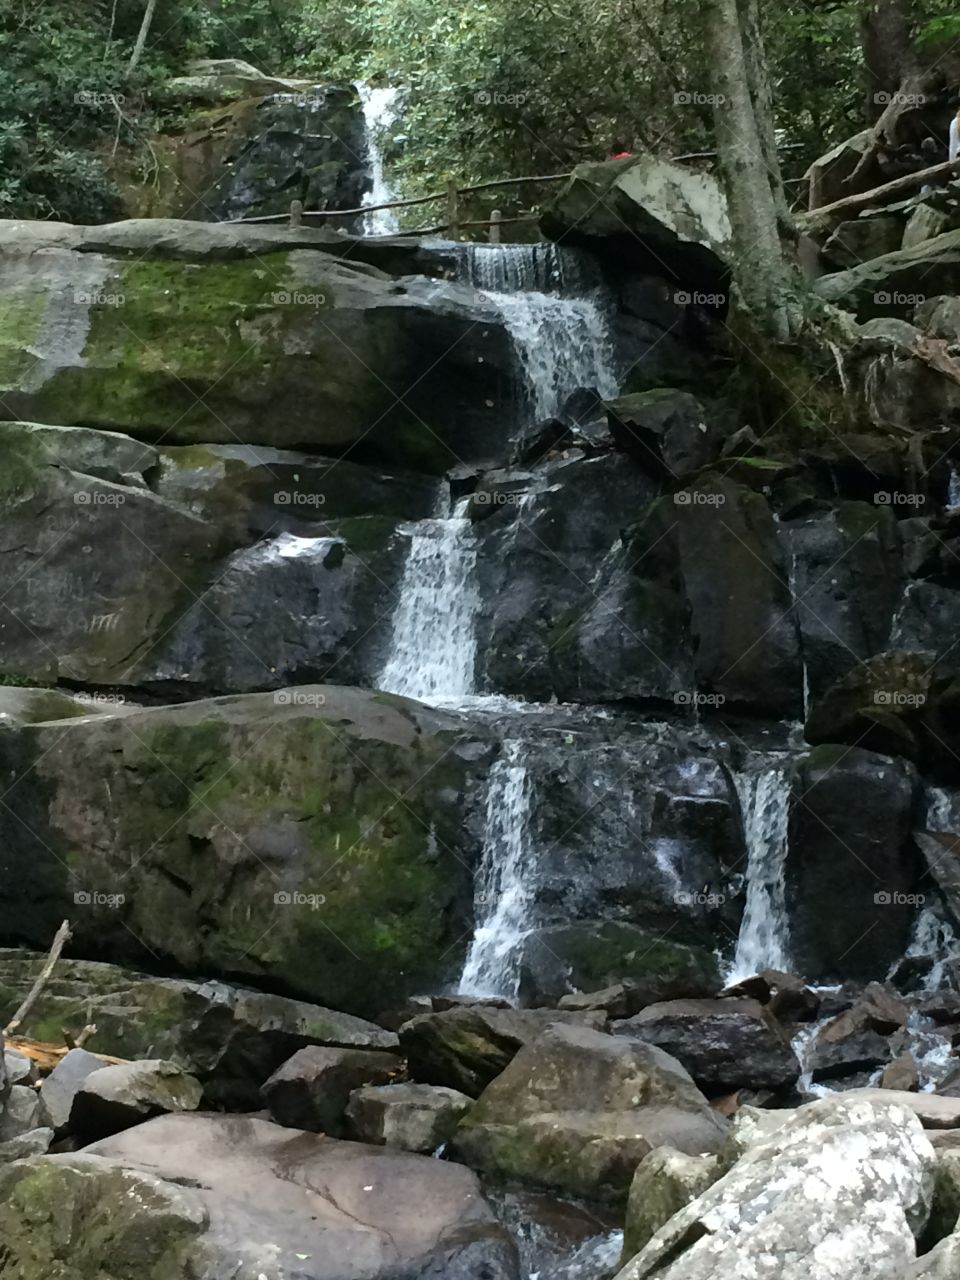 Smoky mountain waterfall. 1.3 mile hike to see these falls in the Smoky Mountains outside of Gatlinburg TN. 